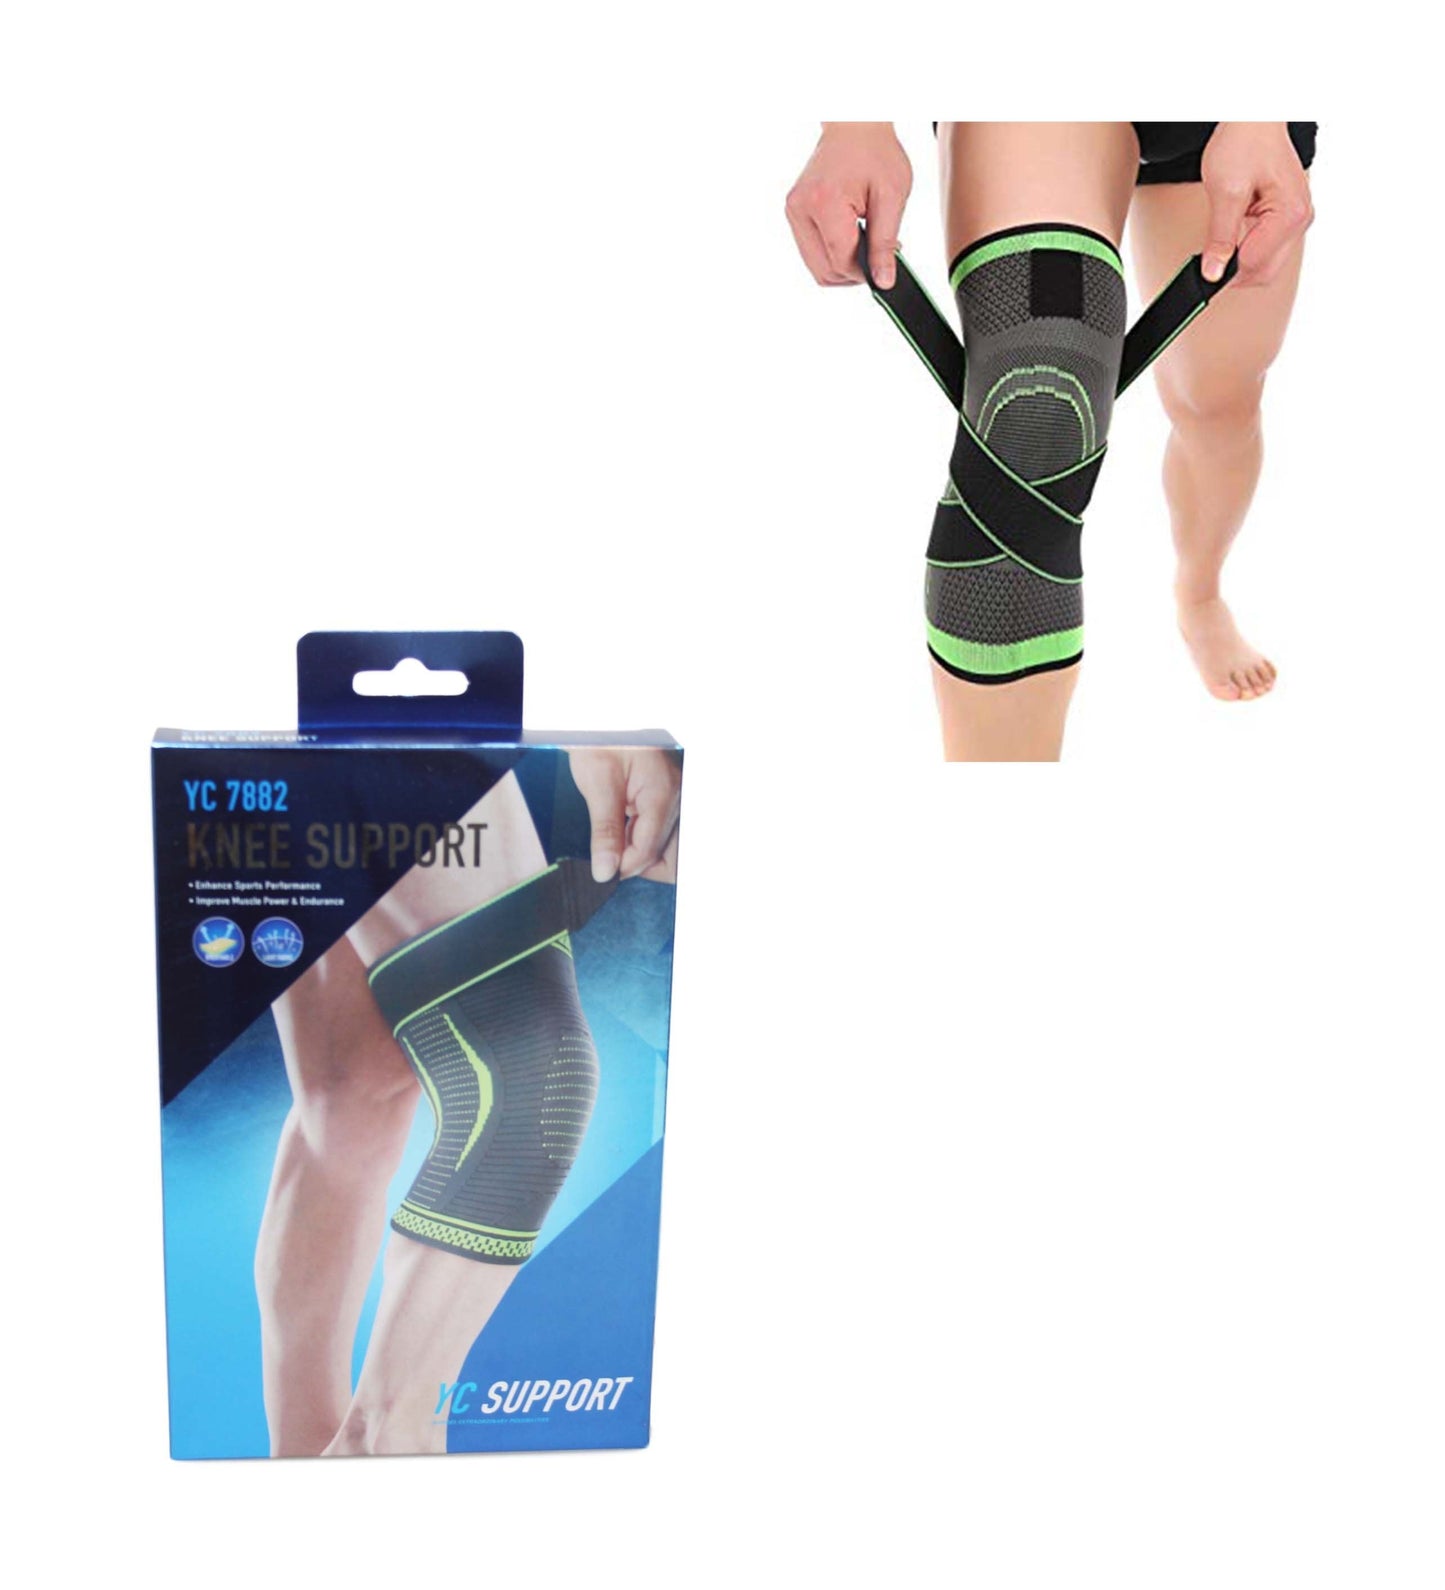 Knee Support Gym Fitness Light Fabric Compression Sport Knee Support 1 Pack 5995 A (Parcel Rate)